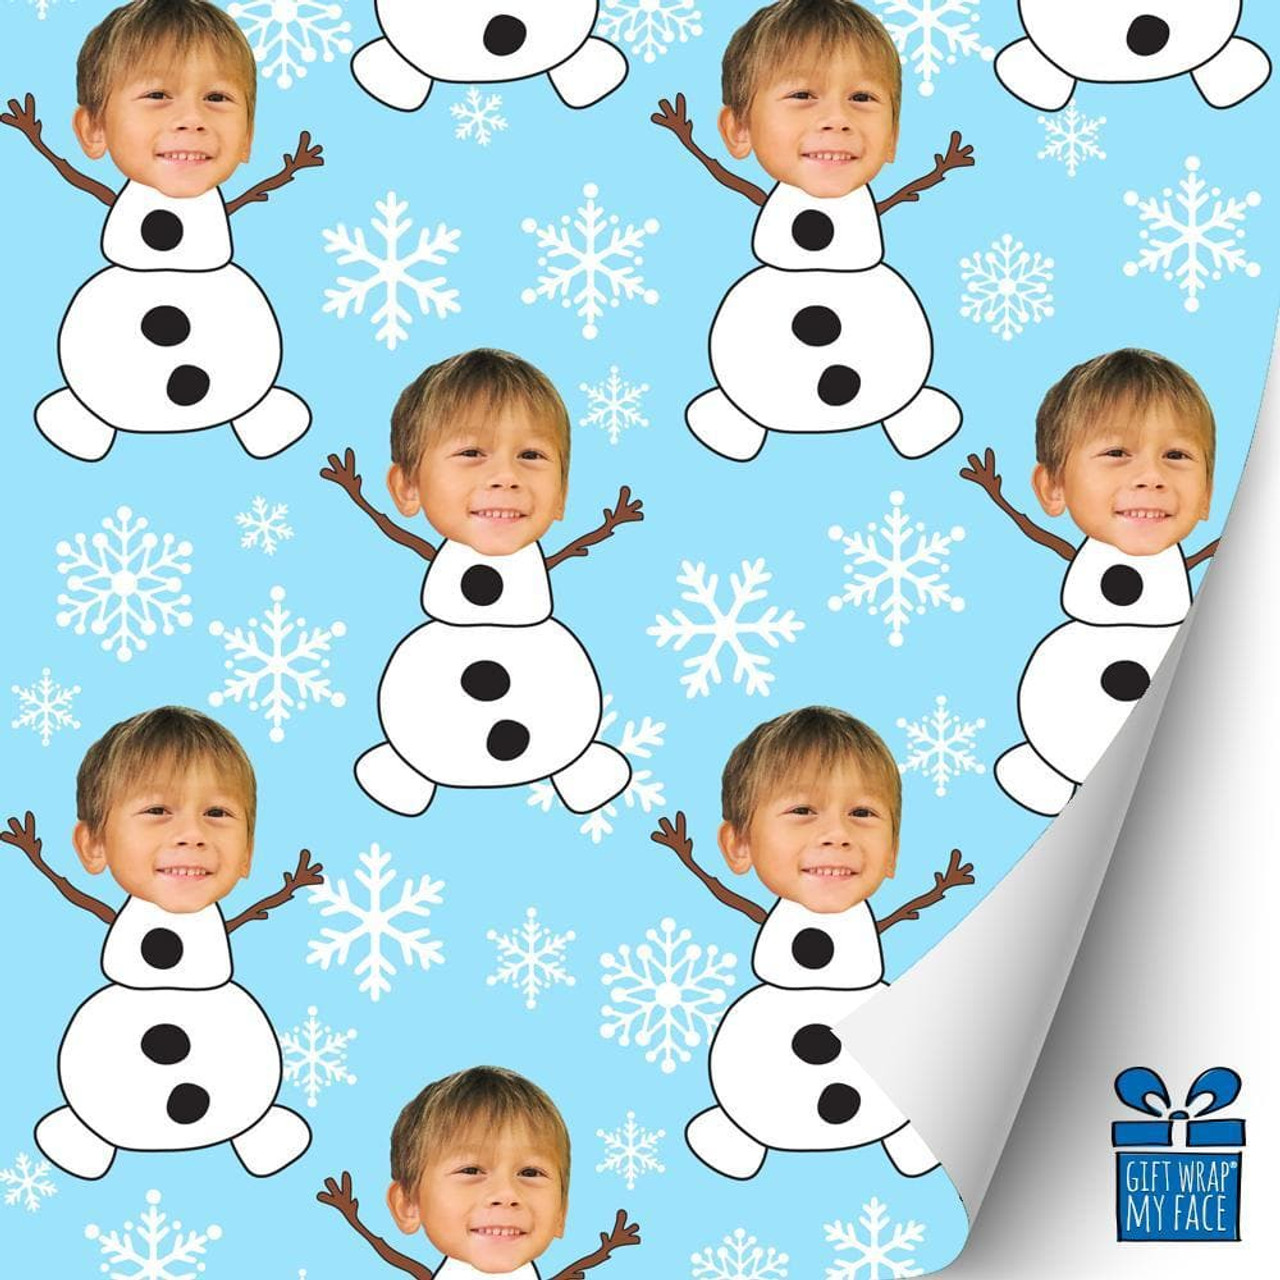 Snowman Party Christmas Gift Wrap Full Ream 833 ft x 24 in